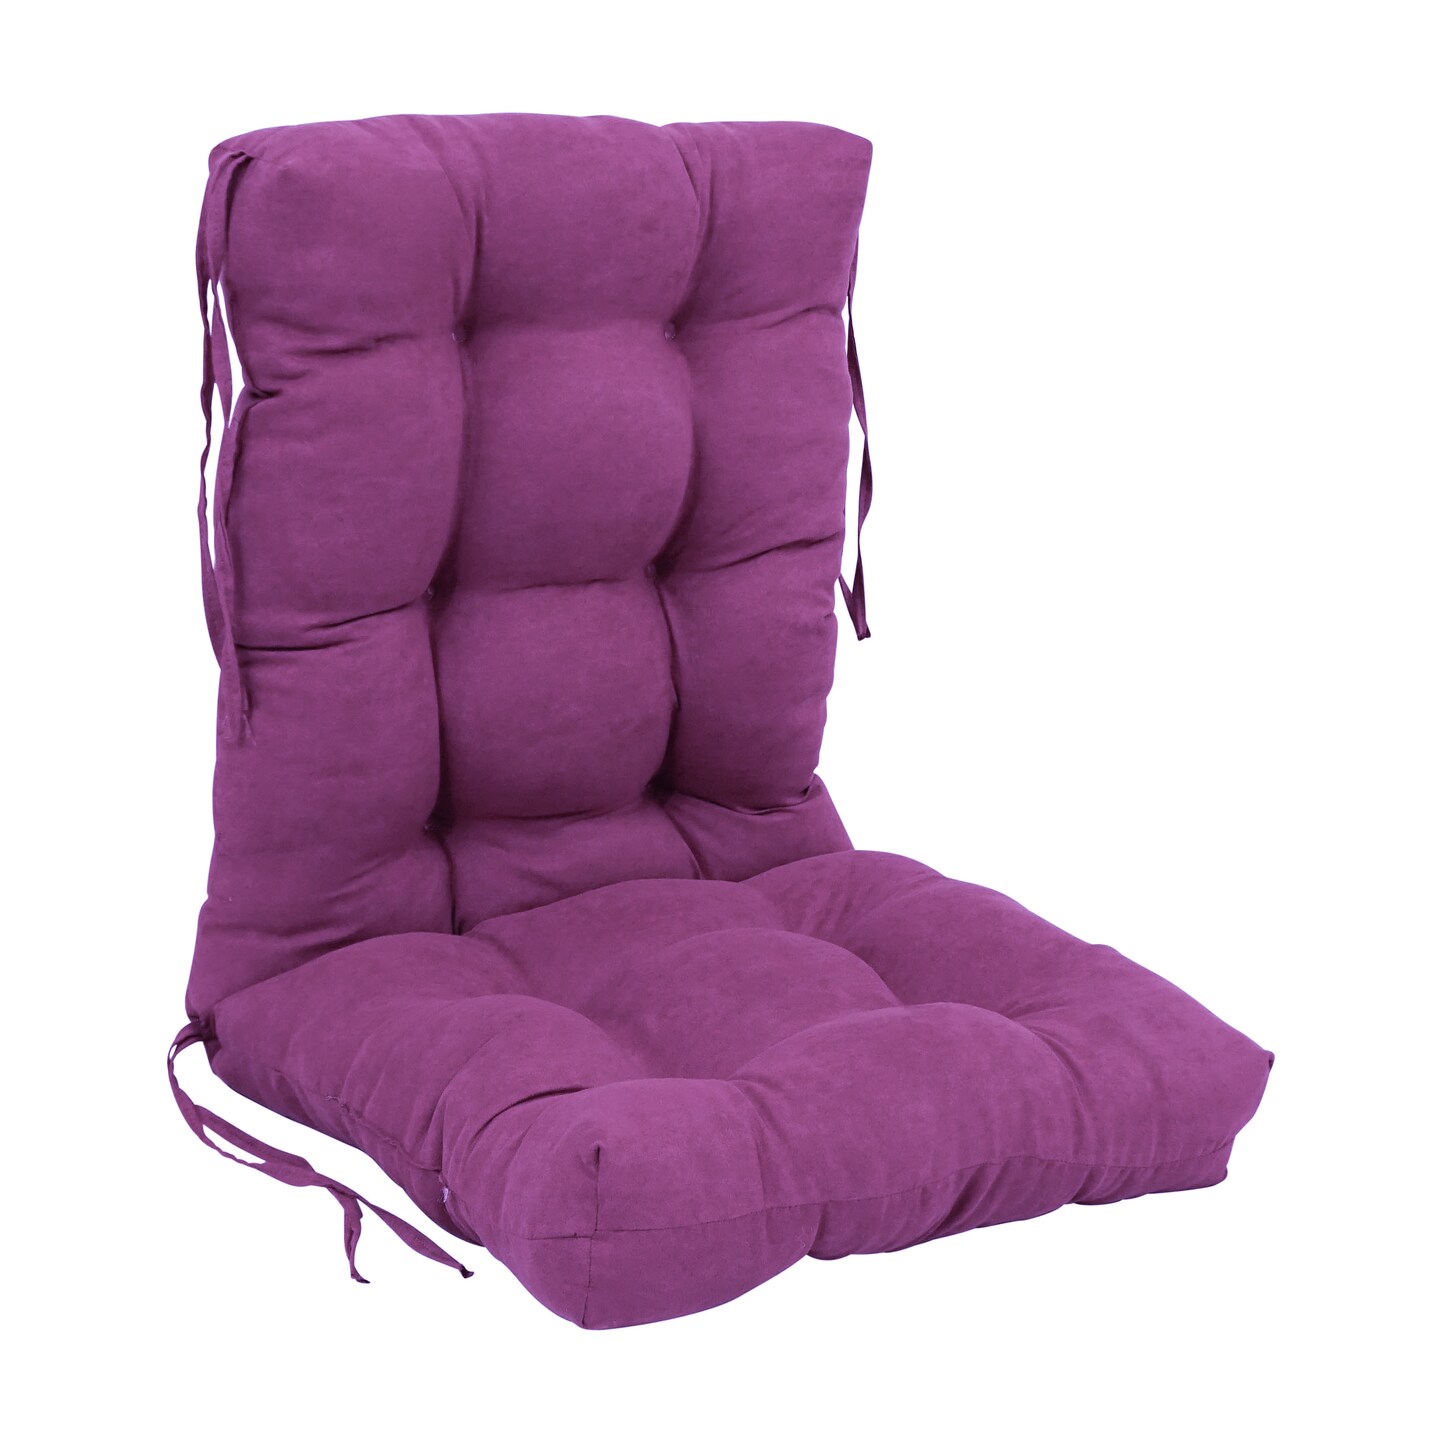 18-inch by 38-inch Solid Microsuede Tufted Chair Cushion Purple